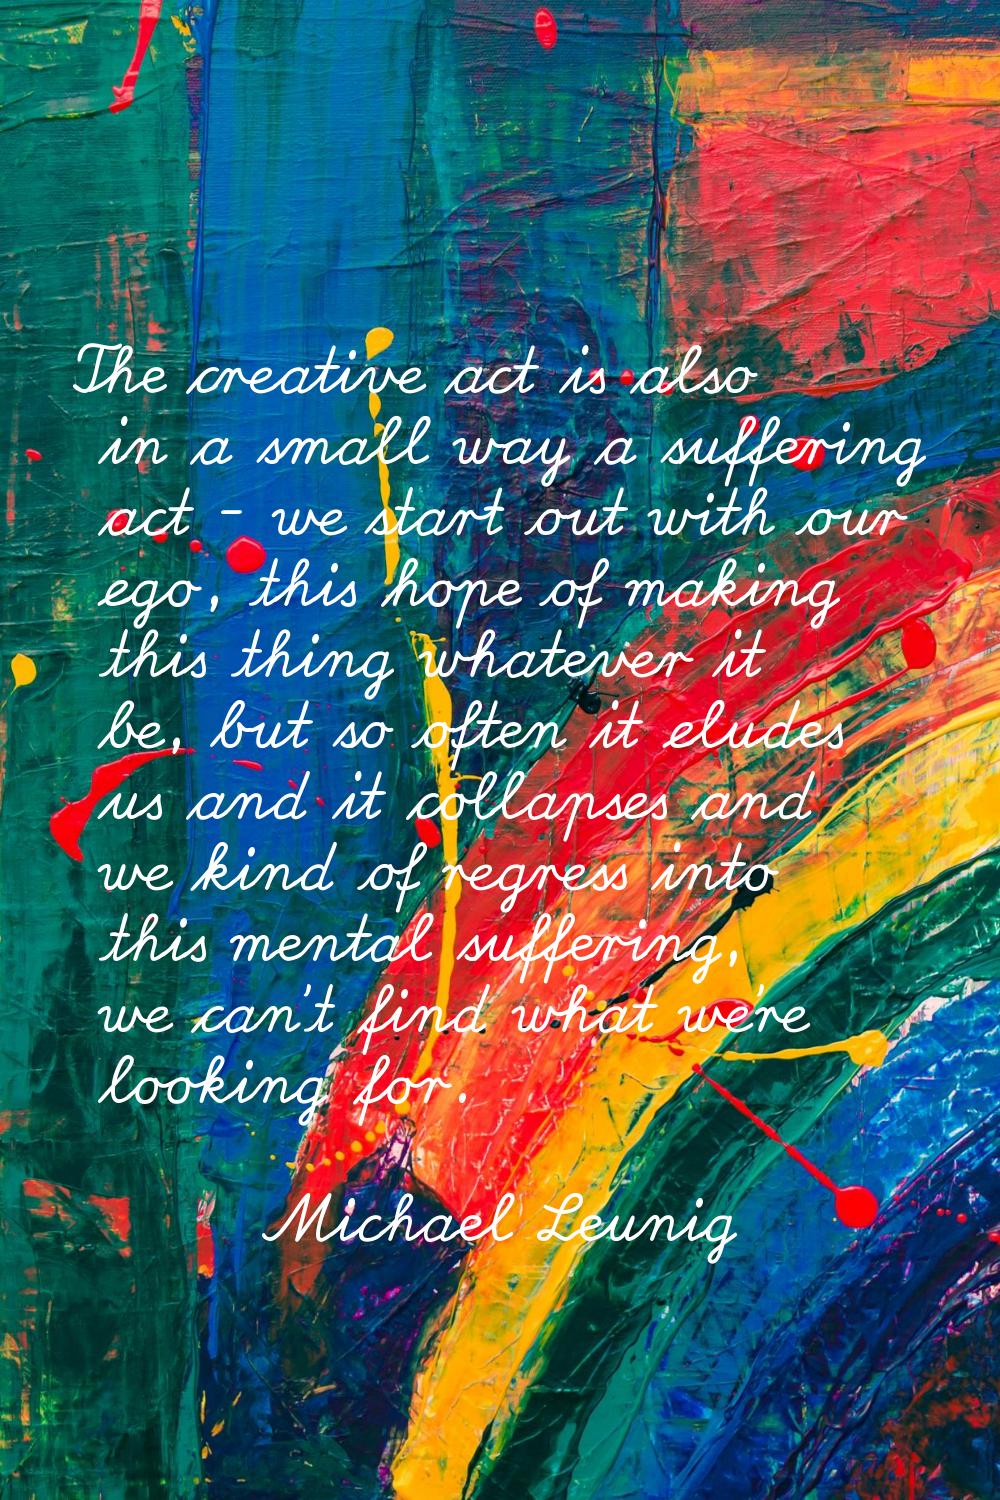 The creative act is also in a small way a suffering act - we start out with our ego, this hope of m